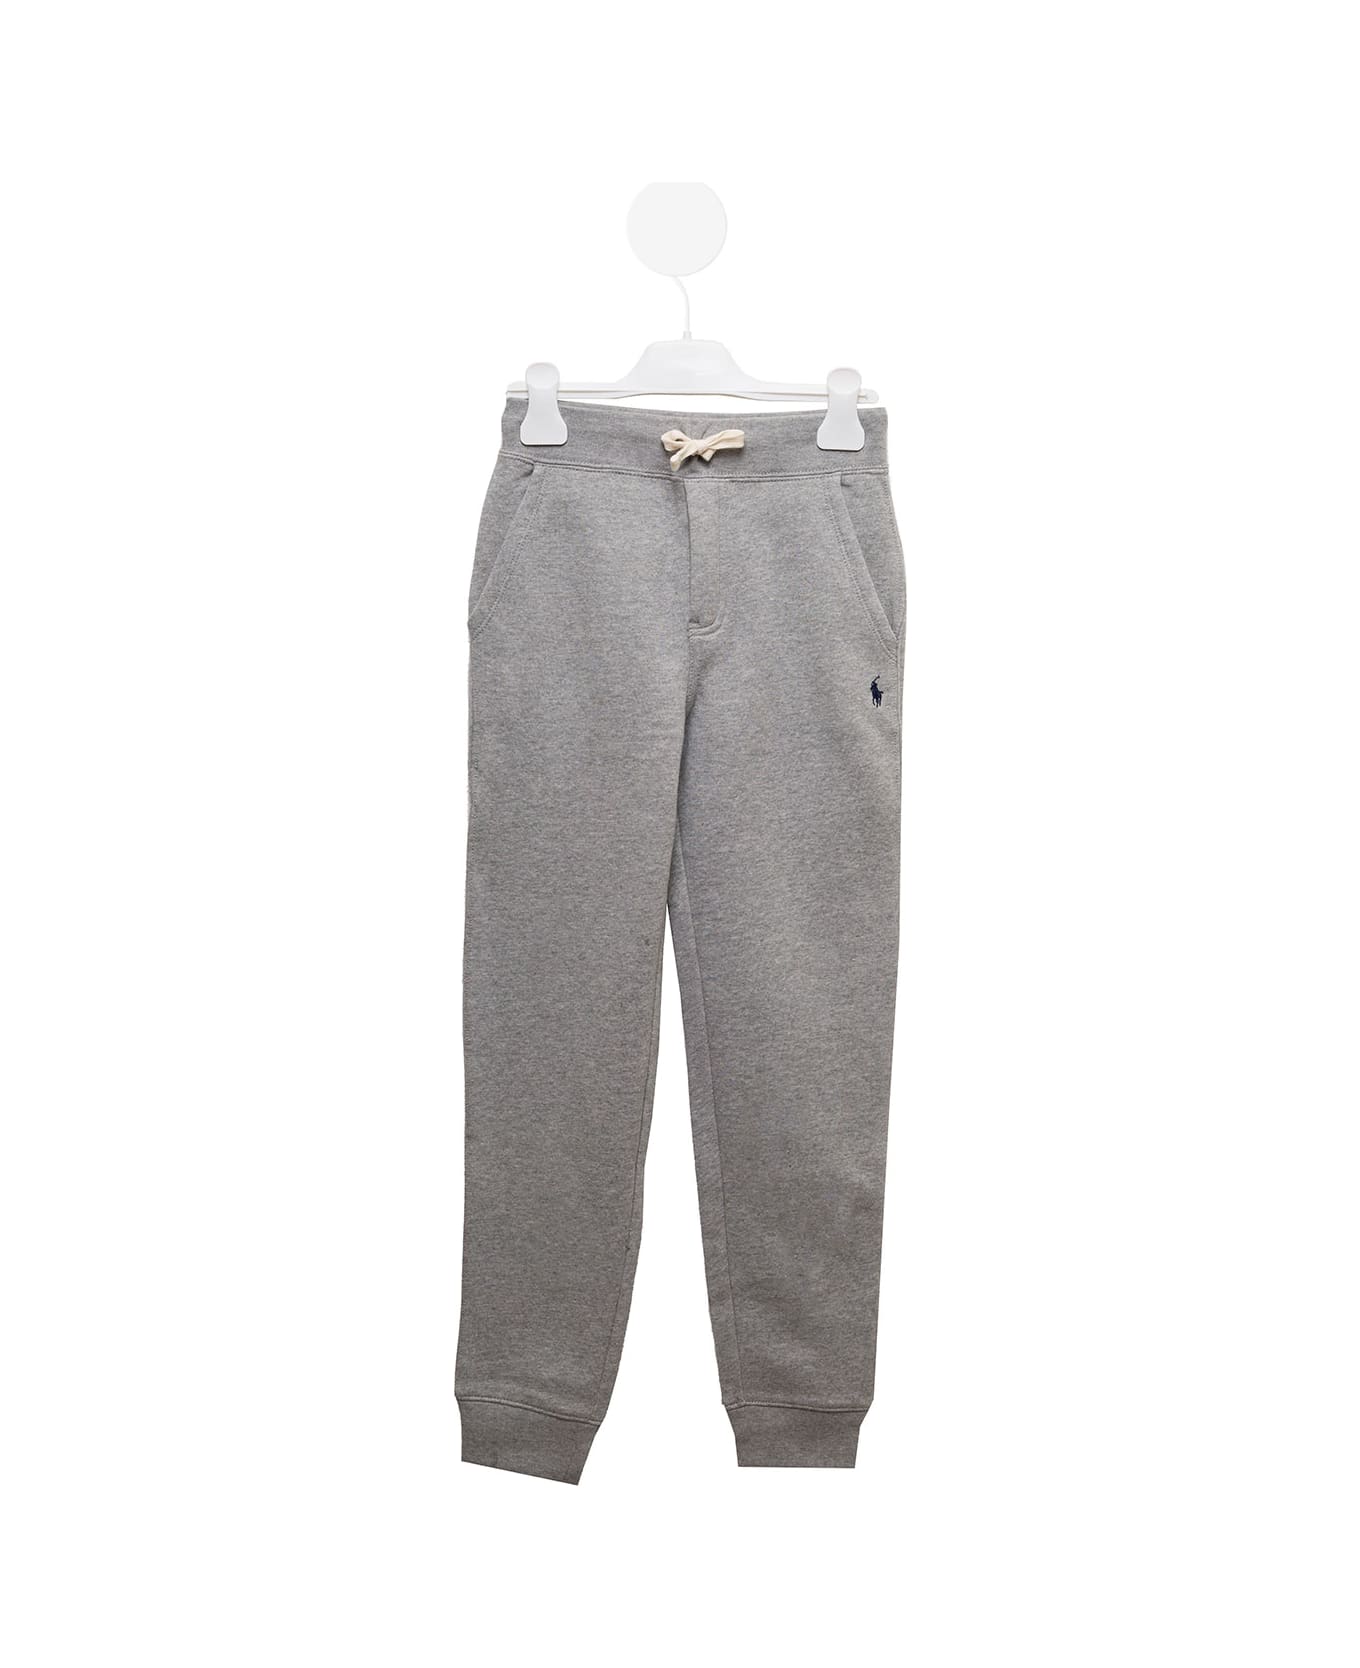 Ralph Lauren Grey Jogger Pants With Logo Embroidery And Drawstring In Cotton Blend Boy